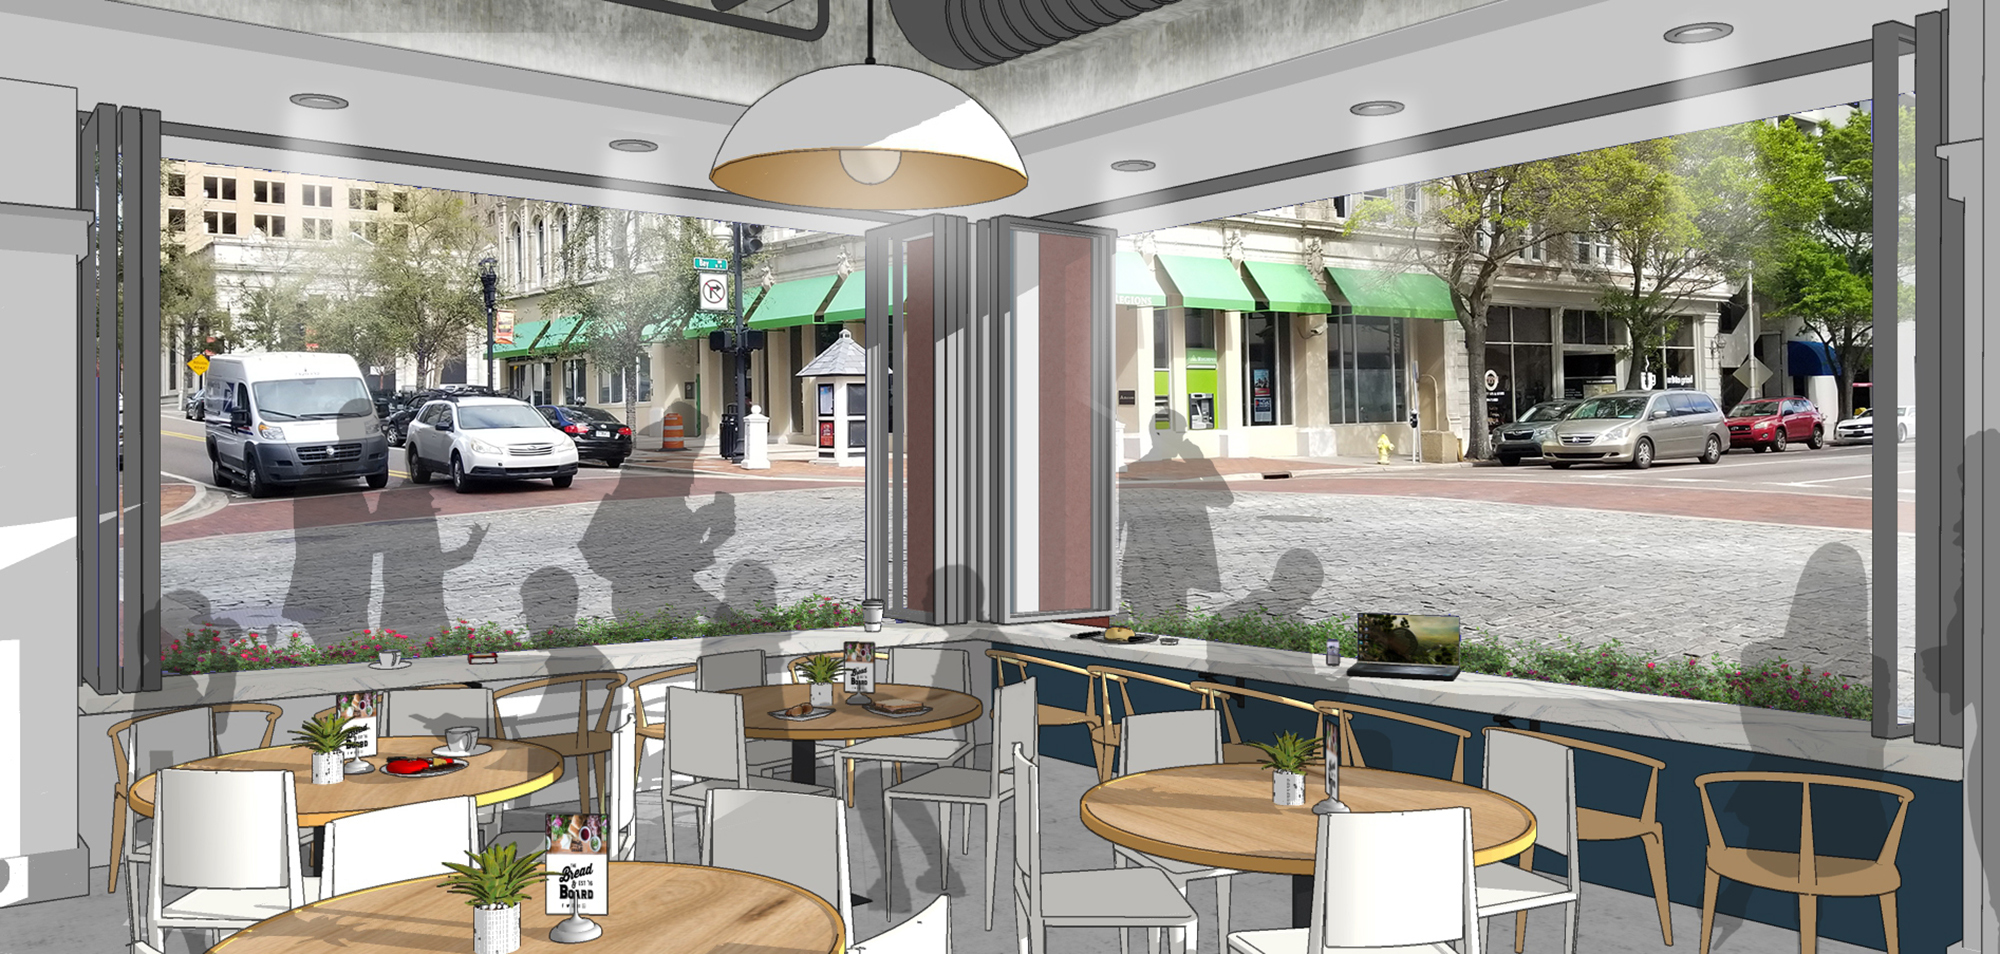 An artist's rendering of The Bread & Board restaurant at 100 W. Bay St. Downtown.